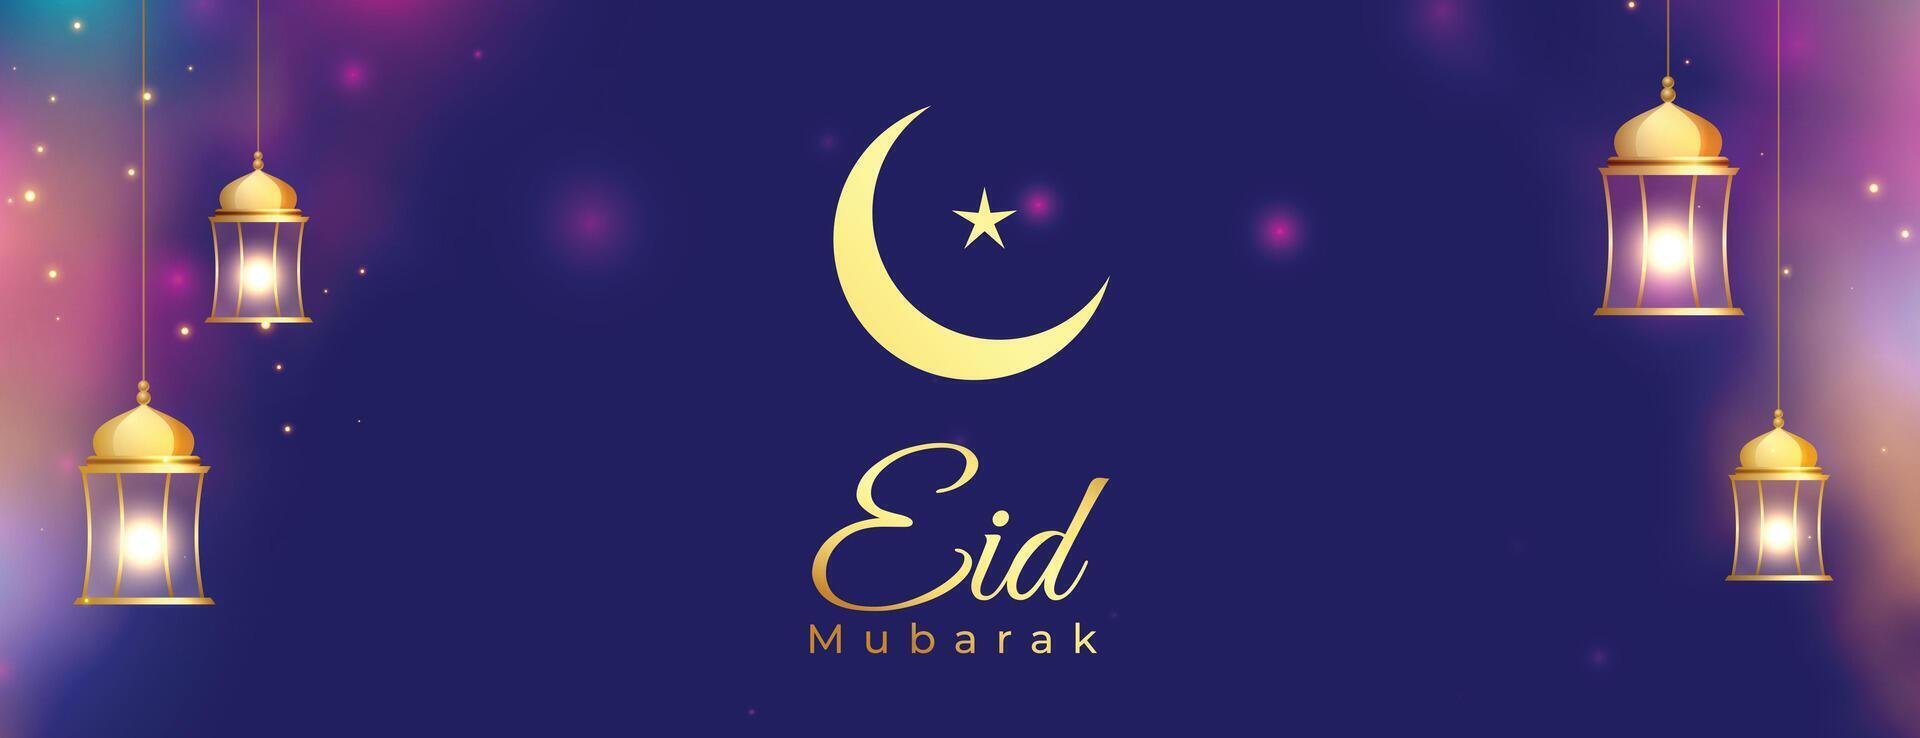 eid mubarak shiny banner share your love and blessing vector